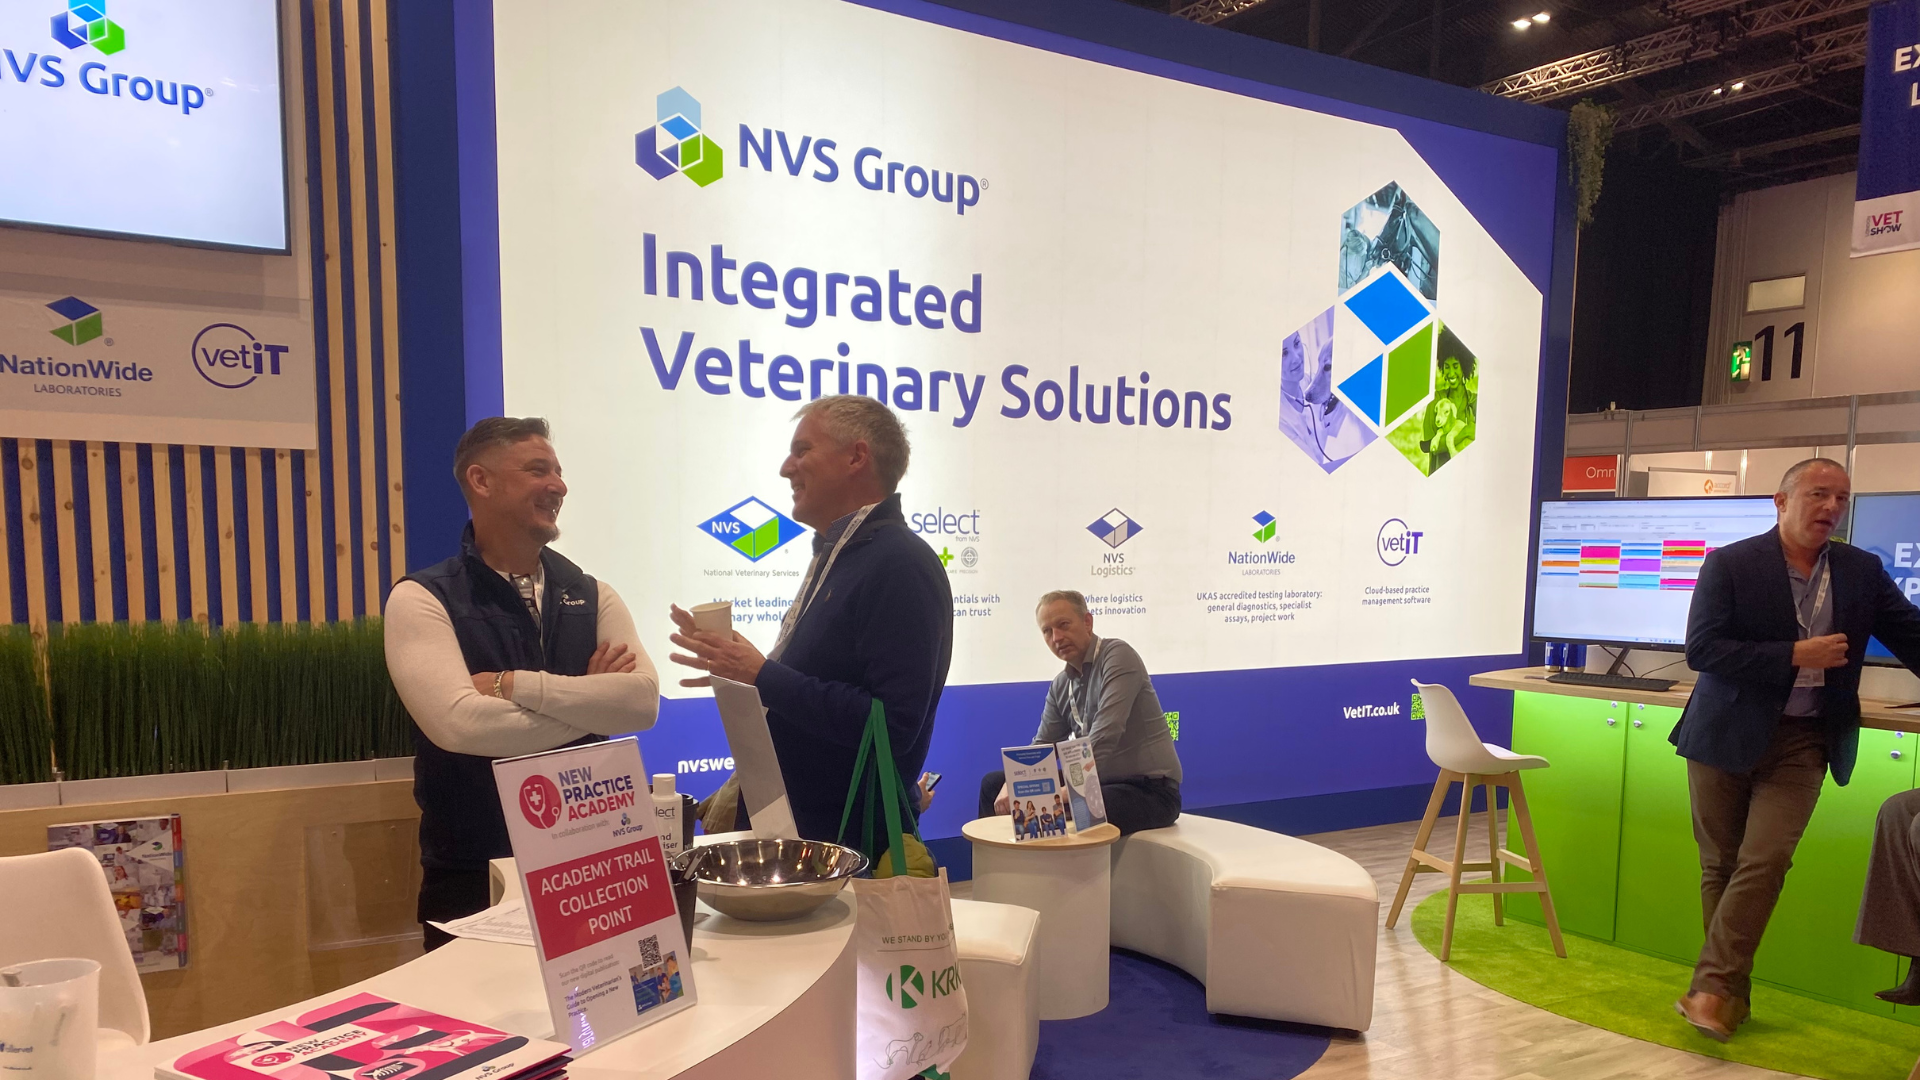 NVS Group at the London Vet Show